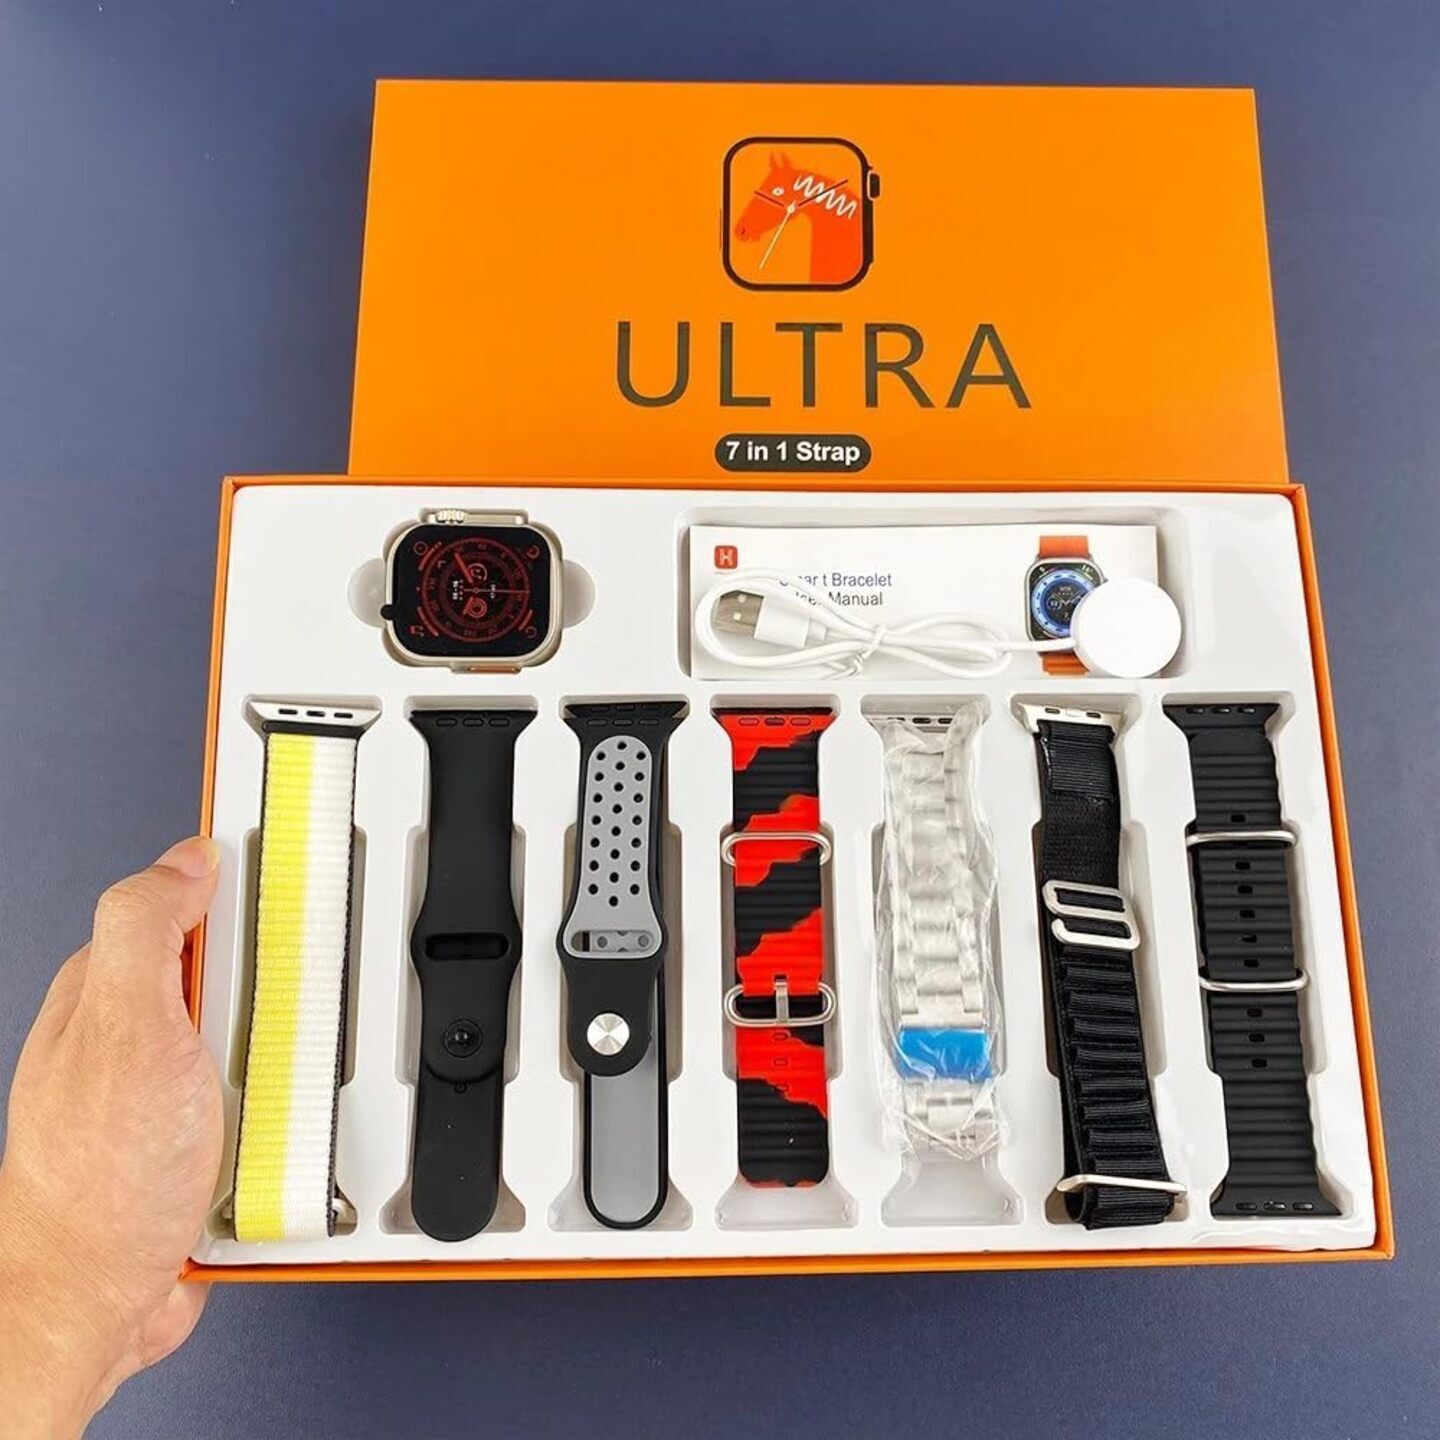 Ultra 7 in 1 Strap BT Calling Smartwatch for men and women